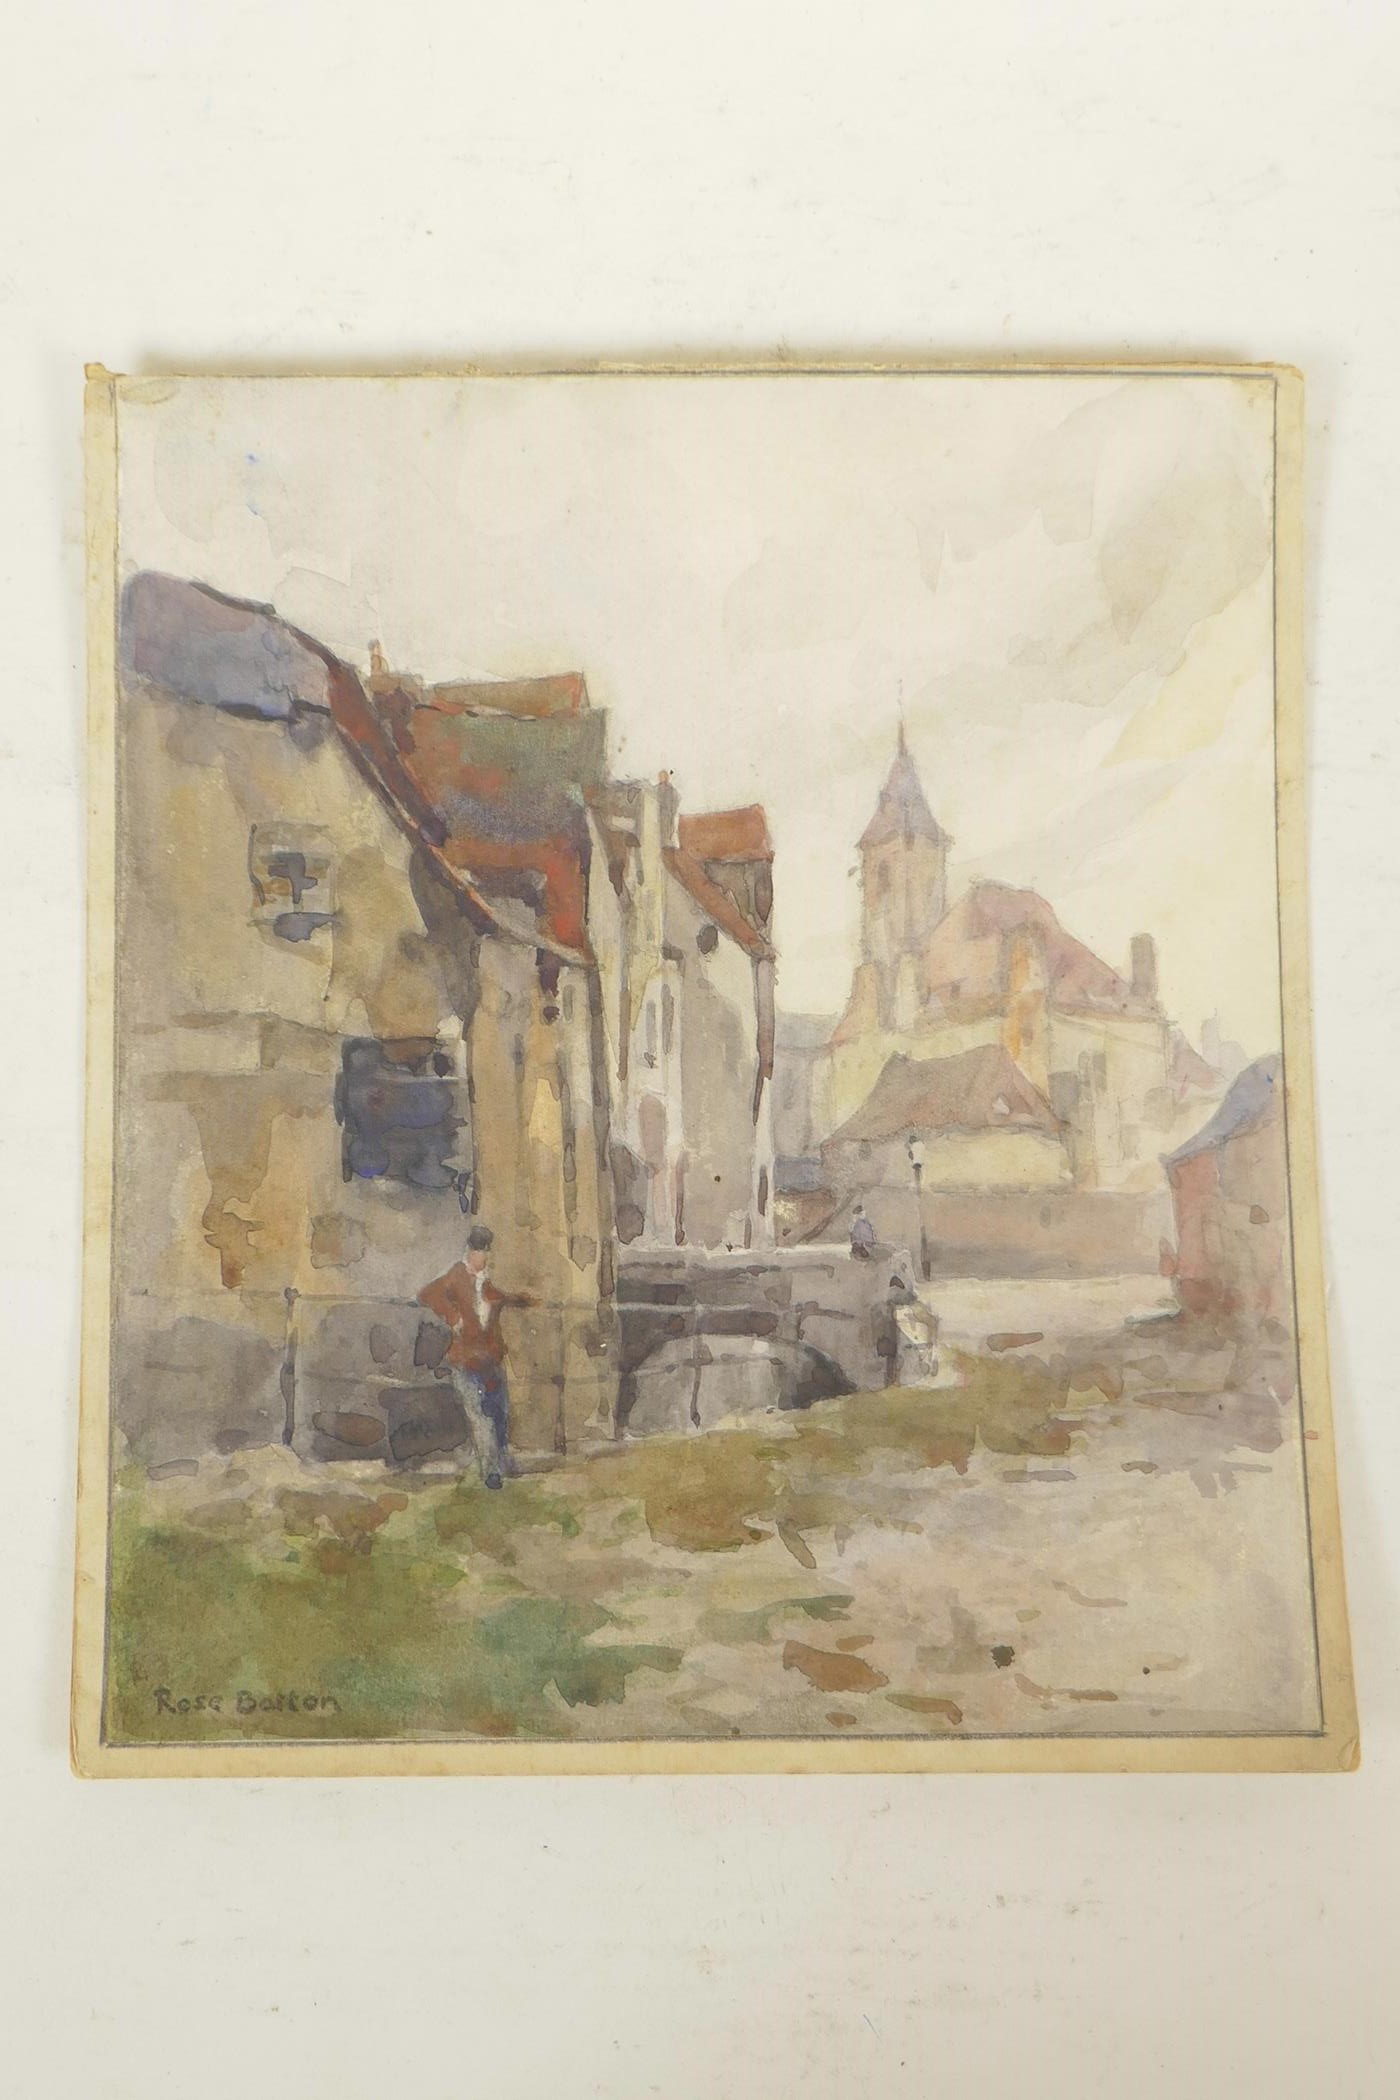 Street scene with figure by canal railings, signed 'Rose Burton', unframed watercolour, 10½" x 9" - Image 2 of 3